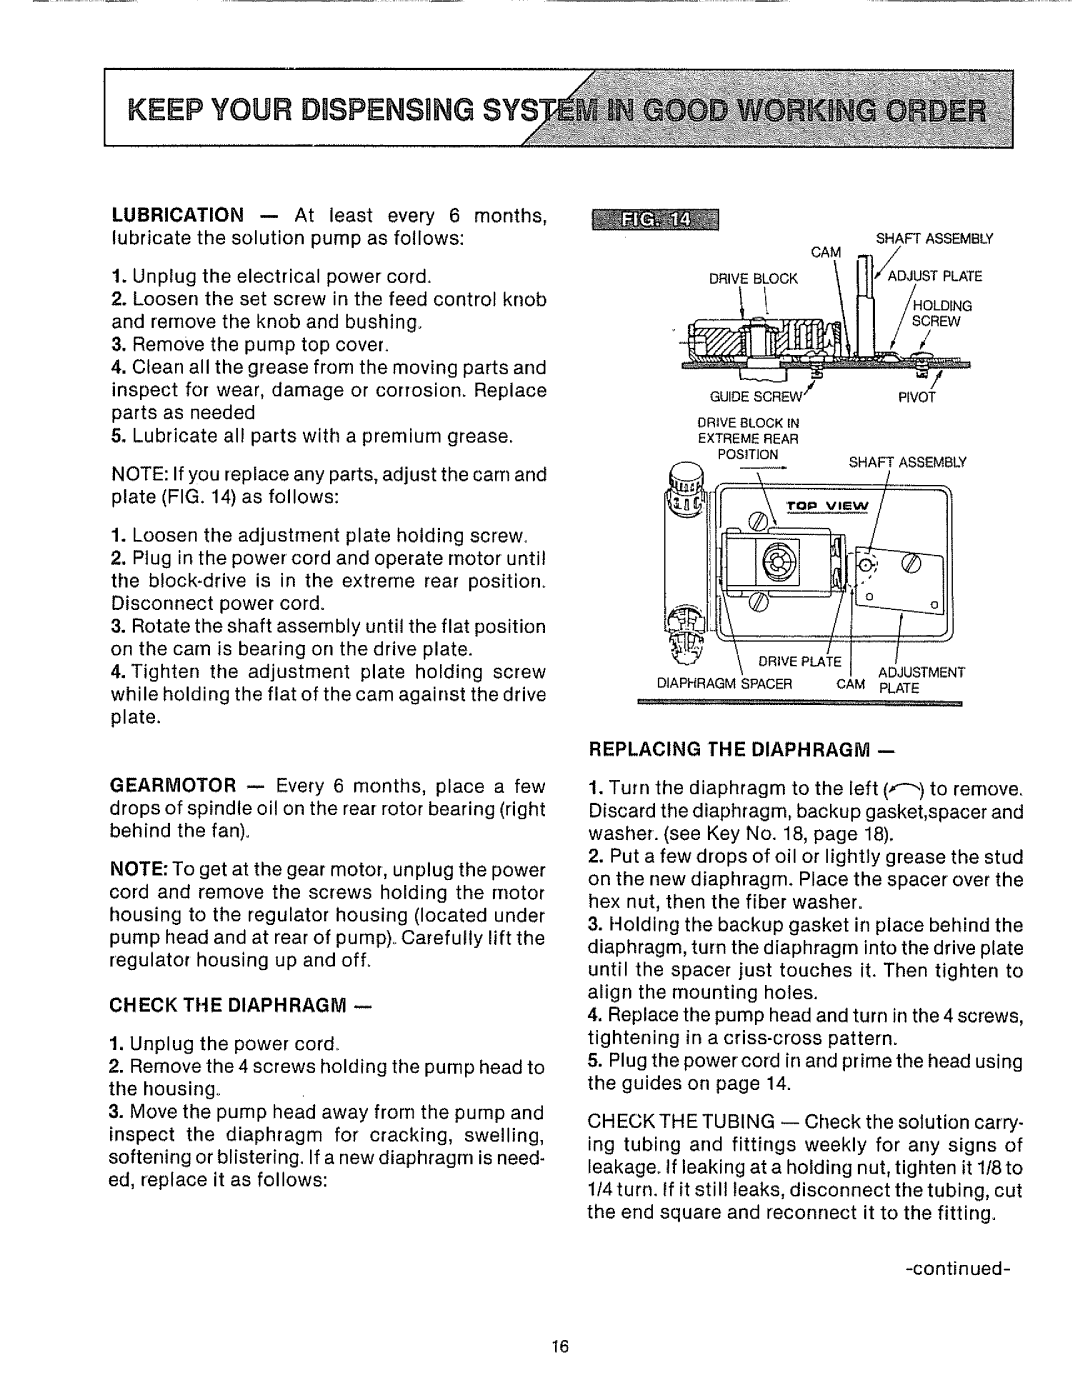 Sears 625.34929 owner manual I KEEPYOUR DUSPENSnNG, oi ojj, rf.......\ v. .w, Check The Diaphragm, Replacing The Diaphragm 